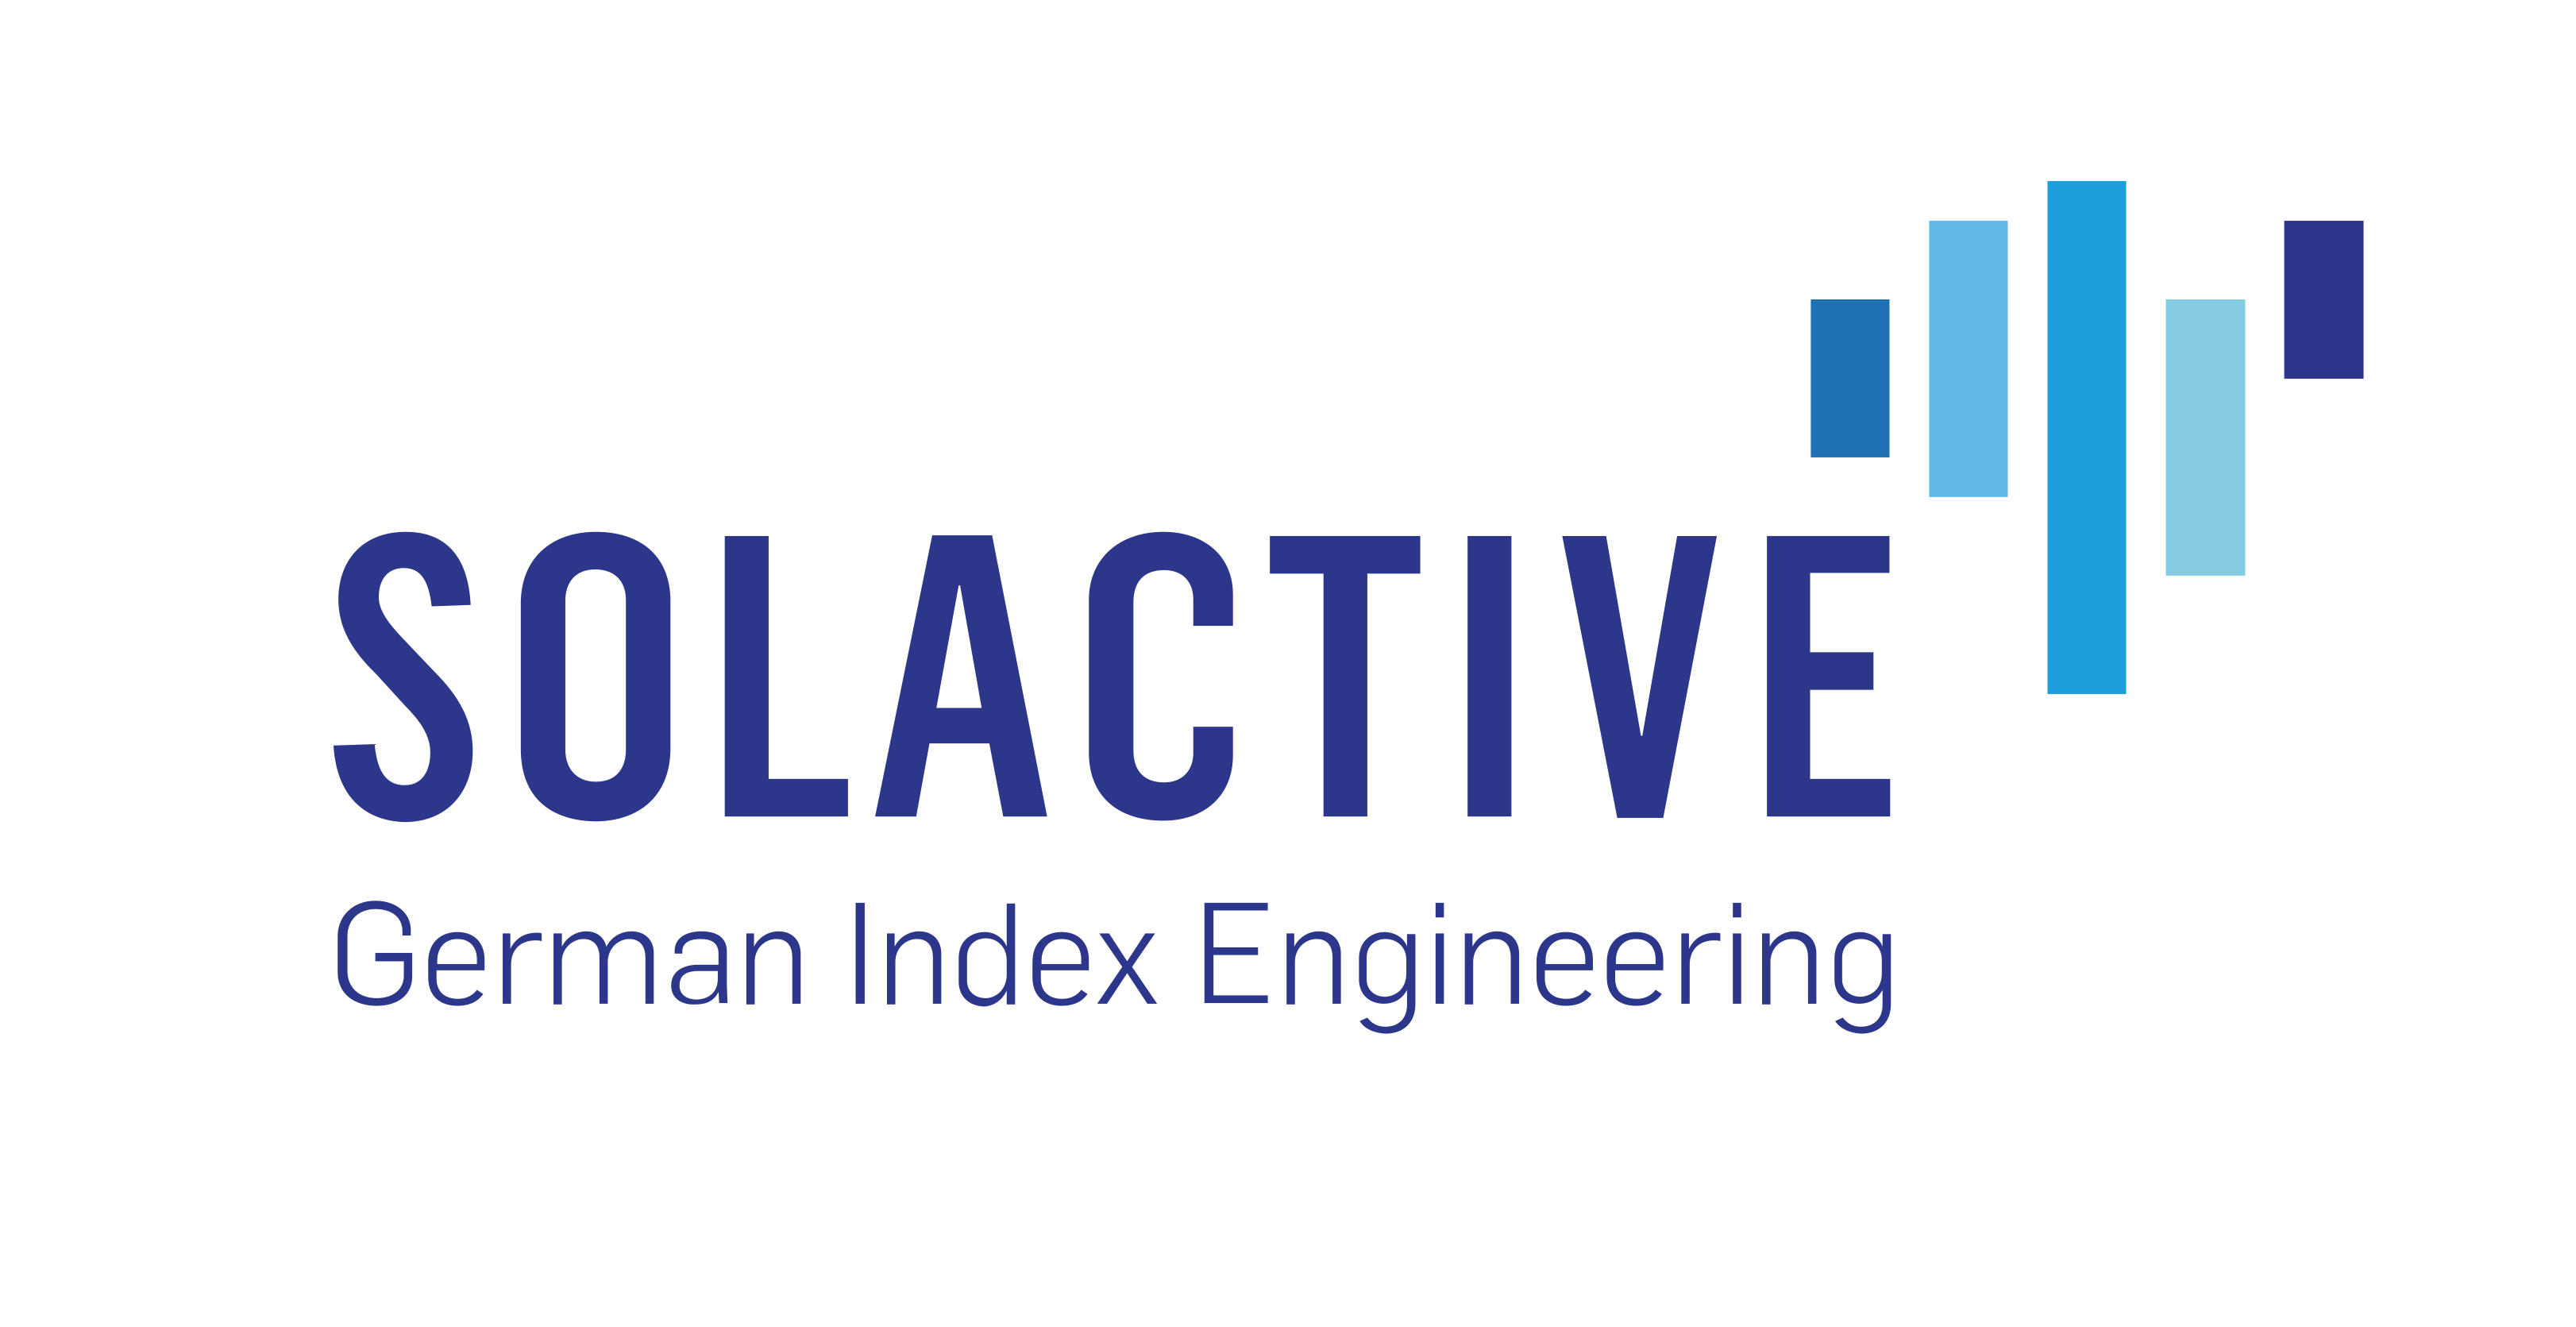 Evolve Funds Group Inc. Launches Banks ETF Based on Solactive’s Index 